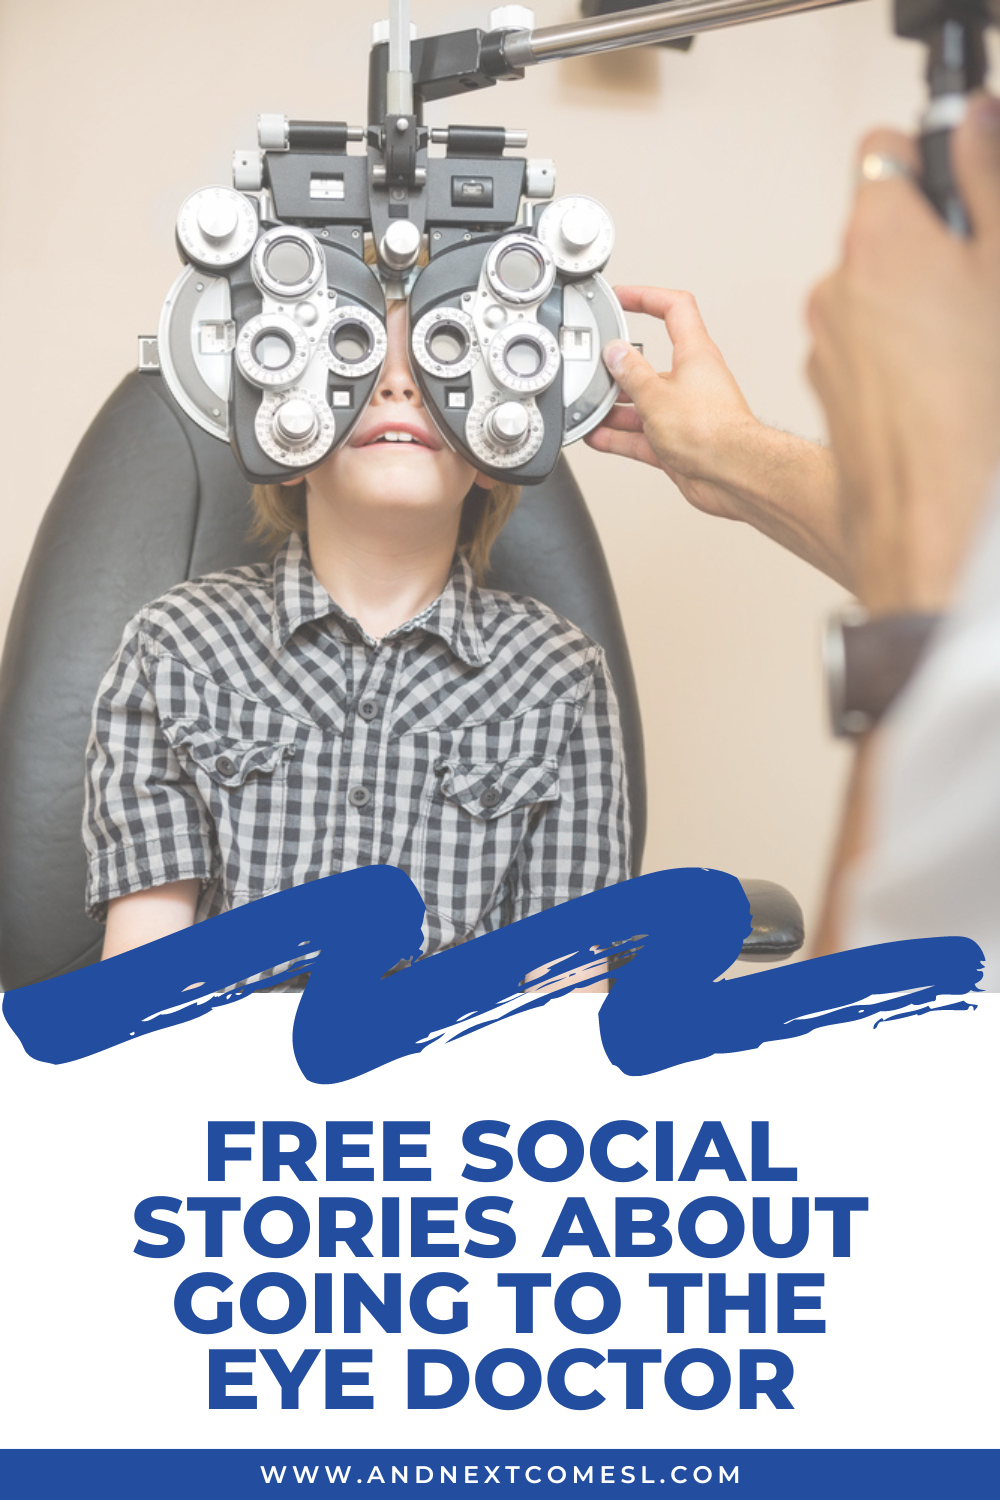 Free social stories about going to the eye doctor, optometrist, or similar for an eye exam, checkup, or appointment